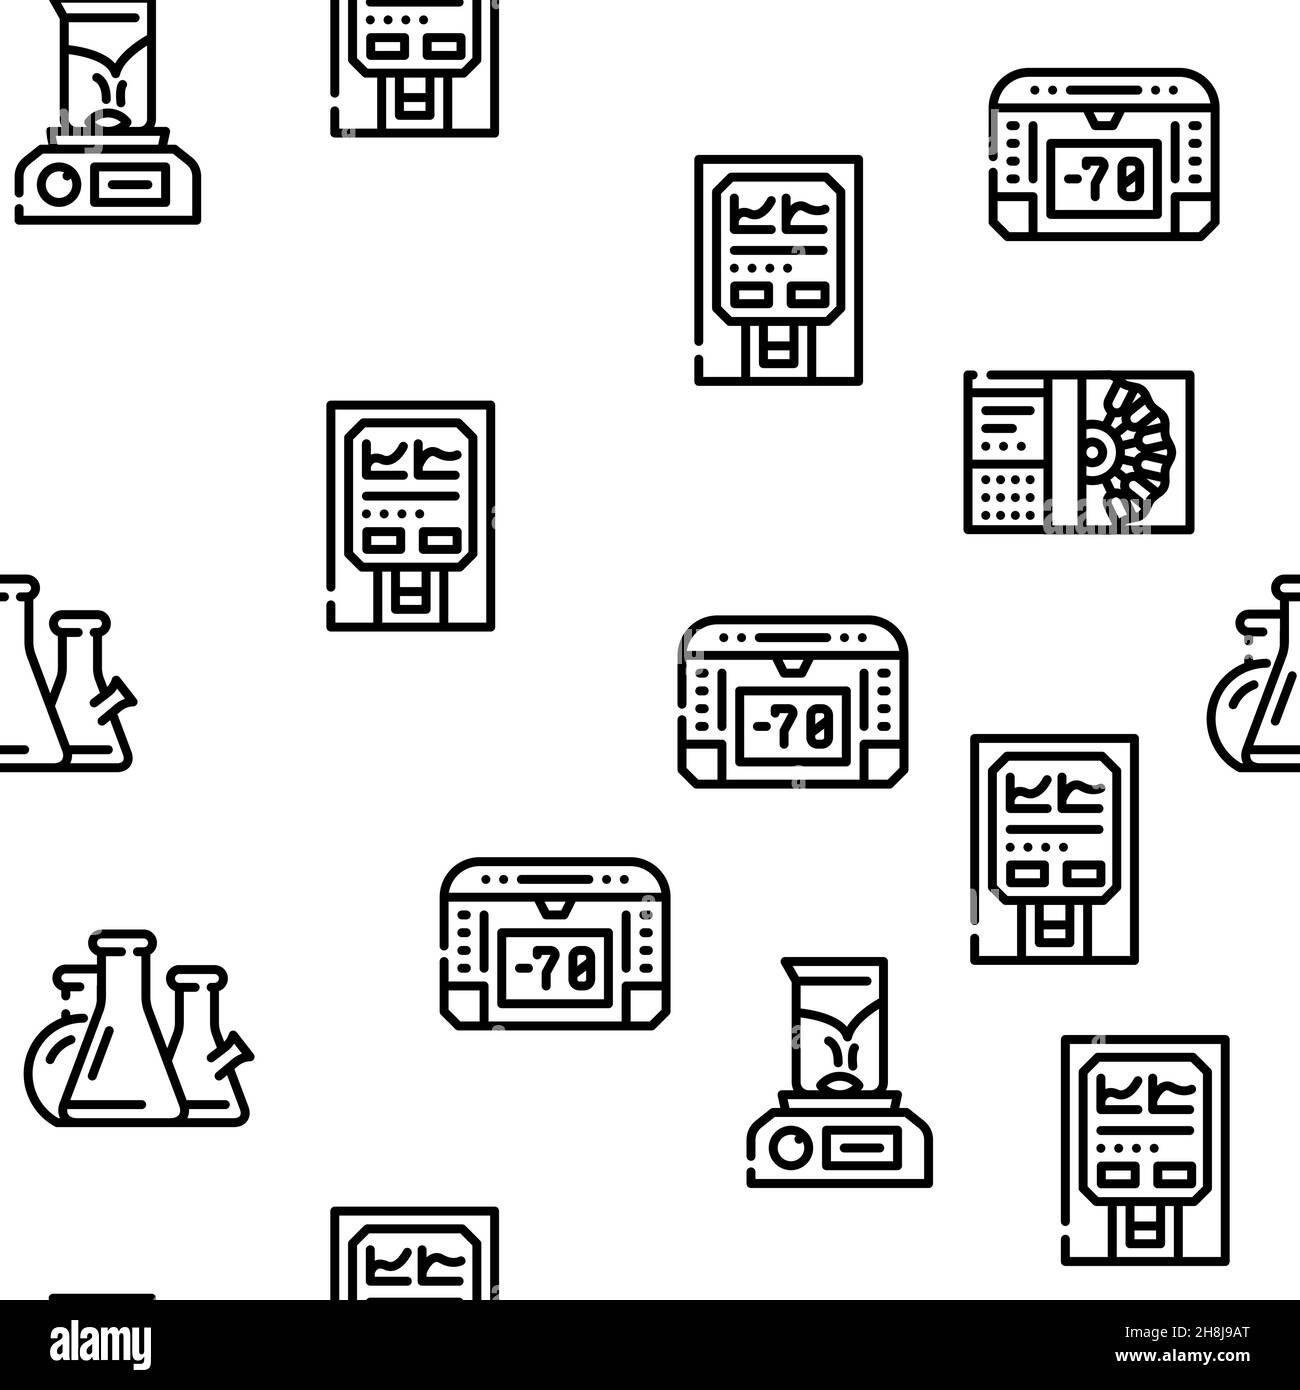 Laboratory Equipment For Analysis Vector Seamless Pattern Stock Vector